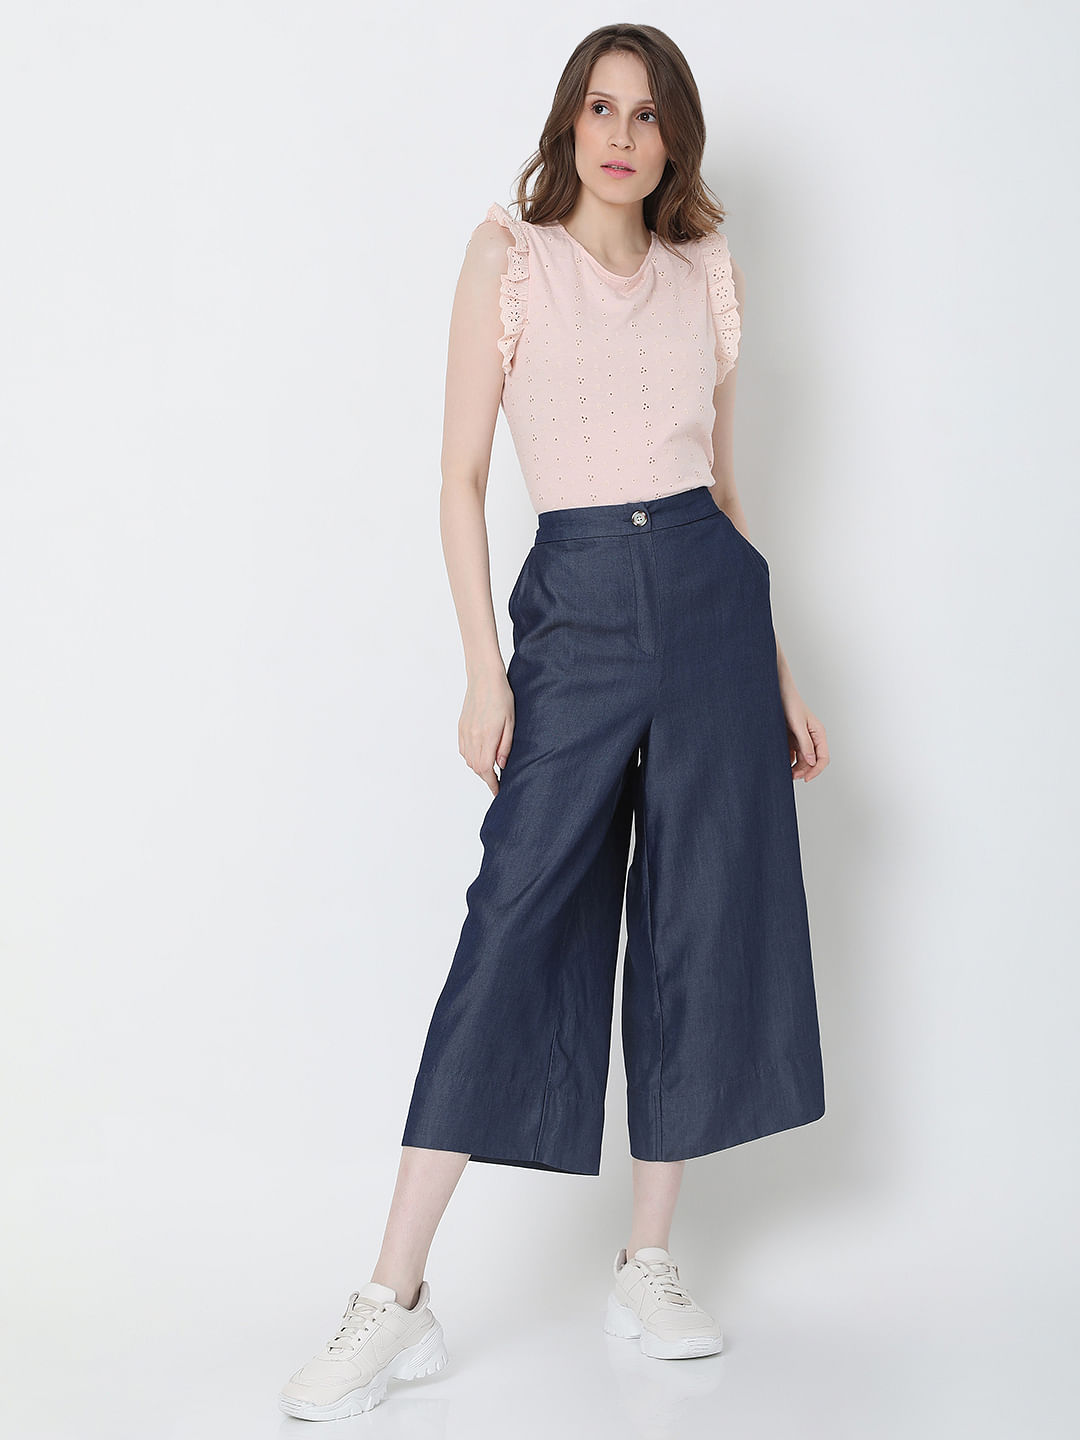 Women's High Waisted Jeans Culottes Plus Size Irregular Button Slim Shorts  Skirt for Women with Pockets - Walmart.com